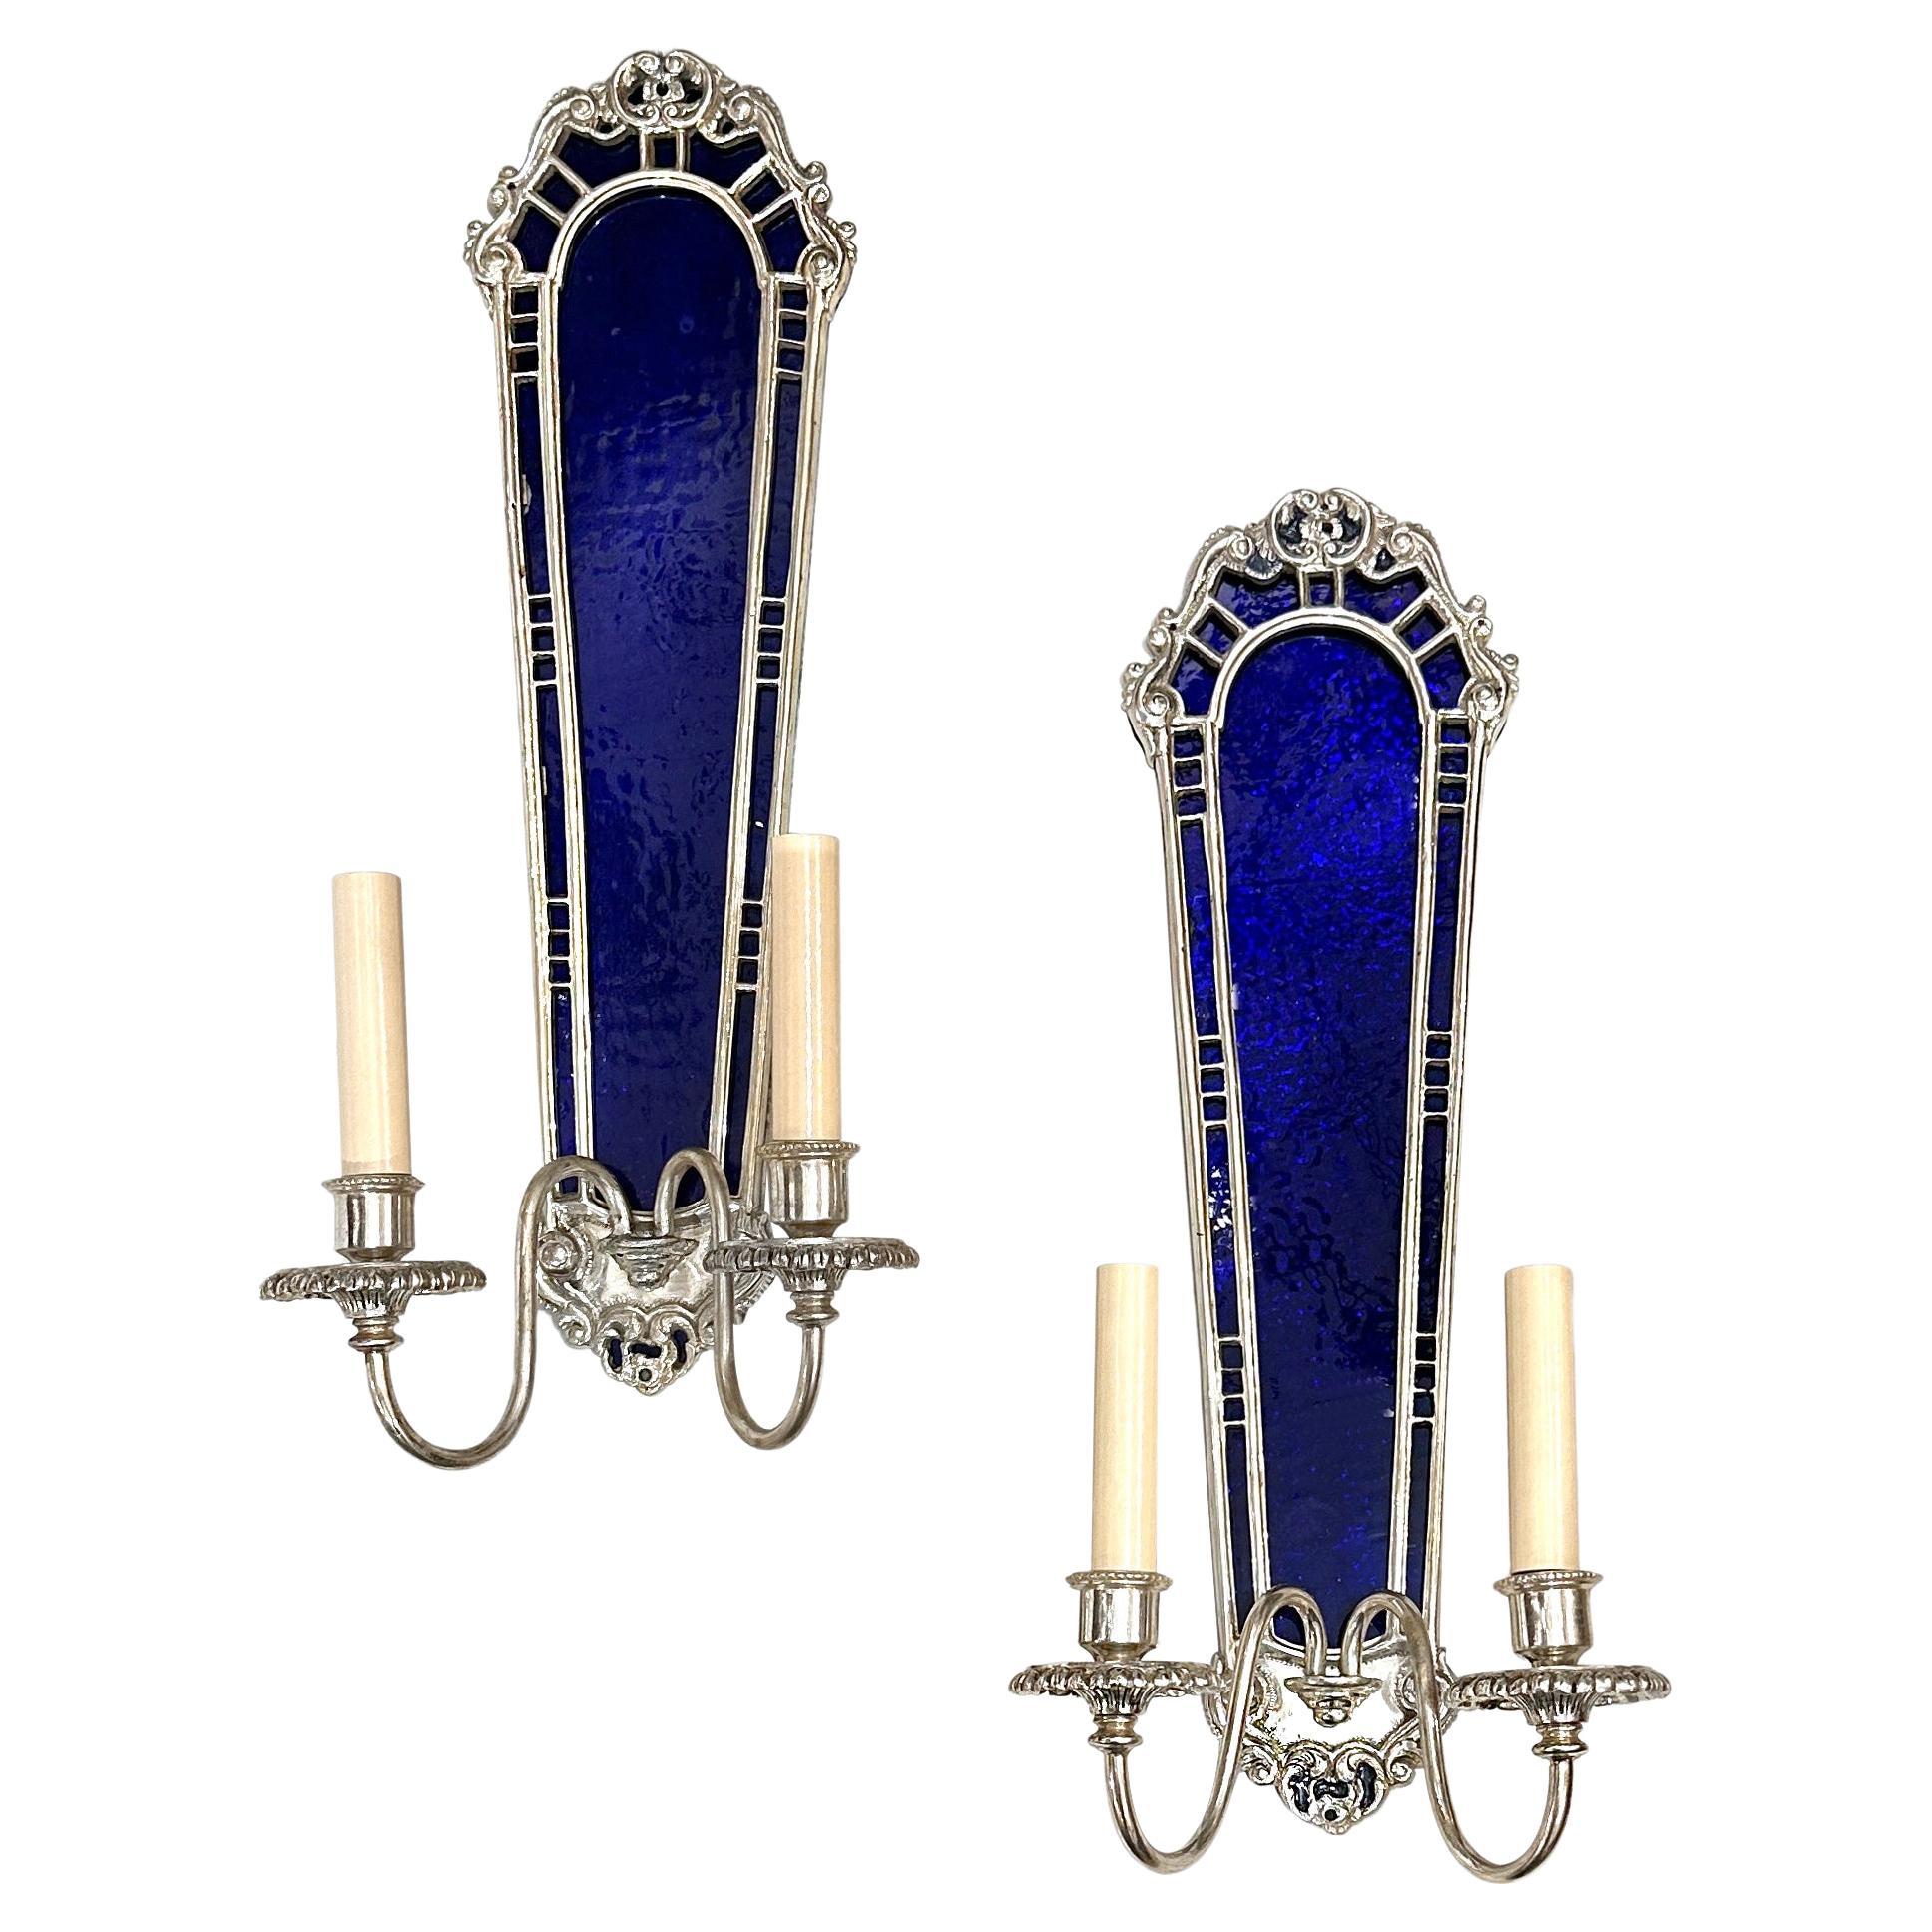 Set of Large Sconces with Cobalt Blue Glass, Sold per Pair